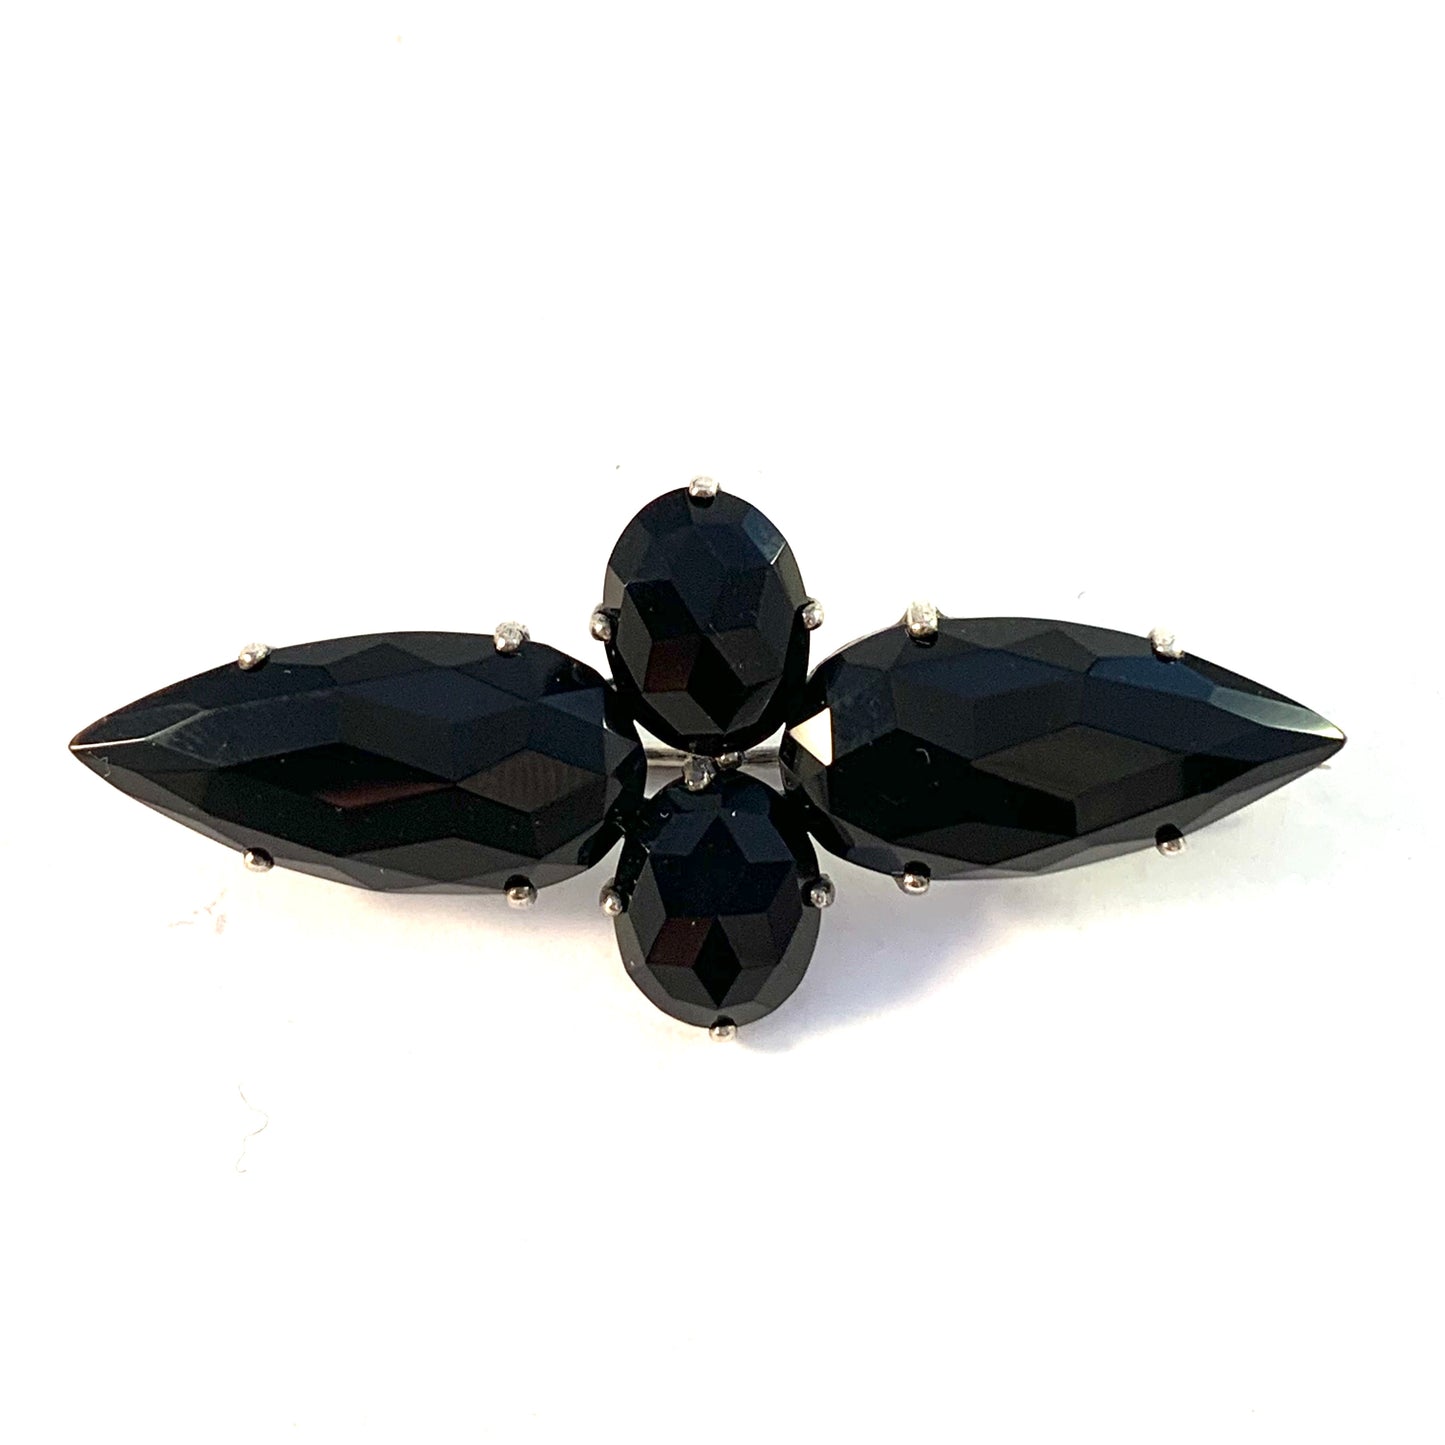 C W Täckholm, Stockholm c year 1910 Solid Silver French Jet Mourning Brooch.